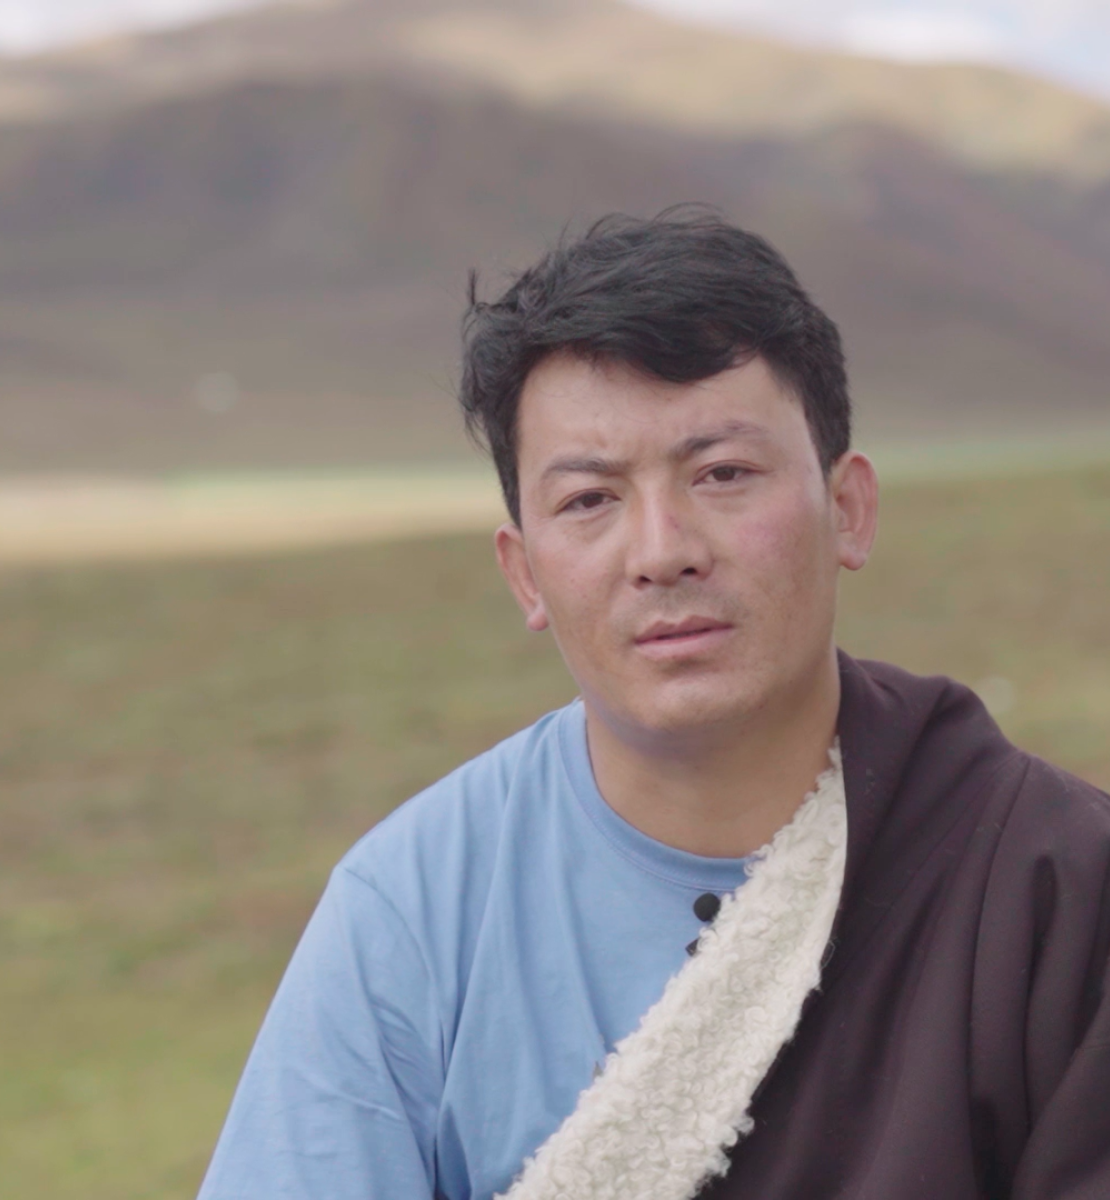 A Tibetan man sitting on grassland with mountains in the back. 